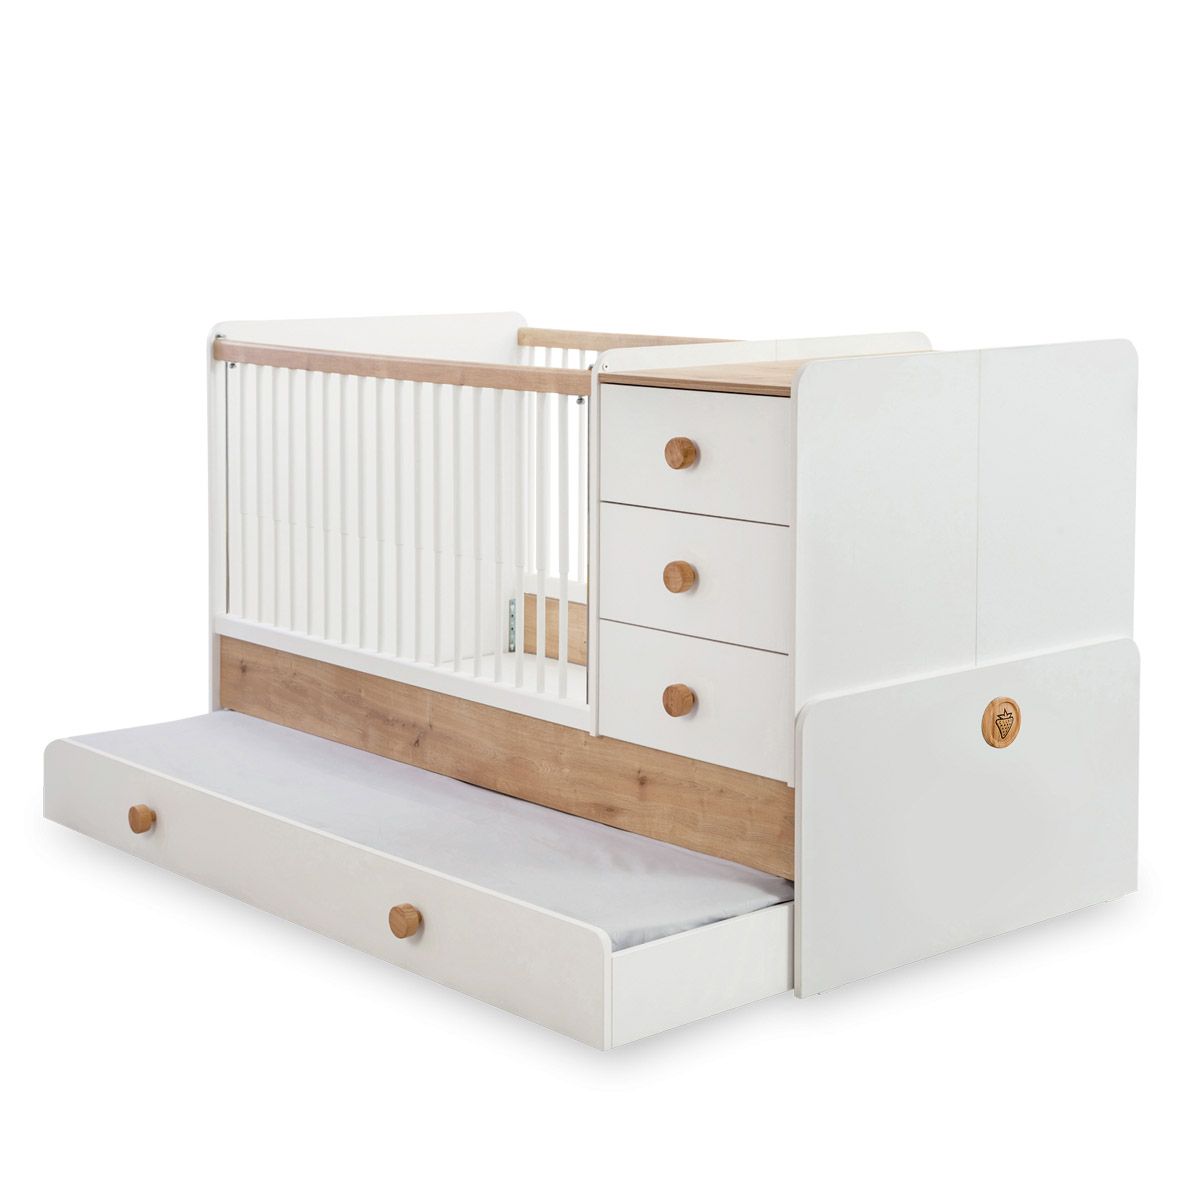 The Benefits of a Small Wooden Baby
Cradle